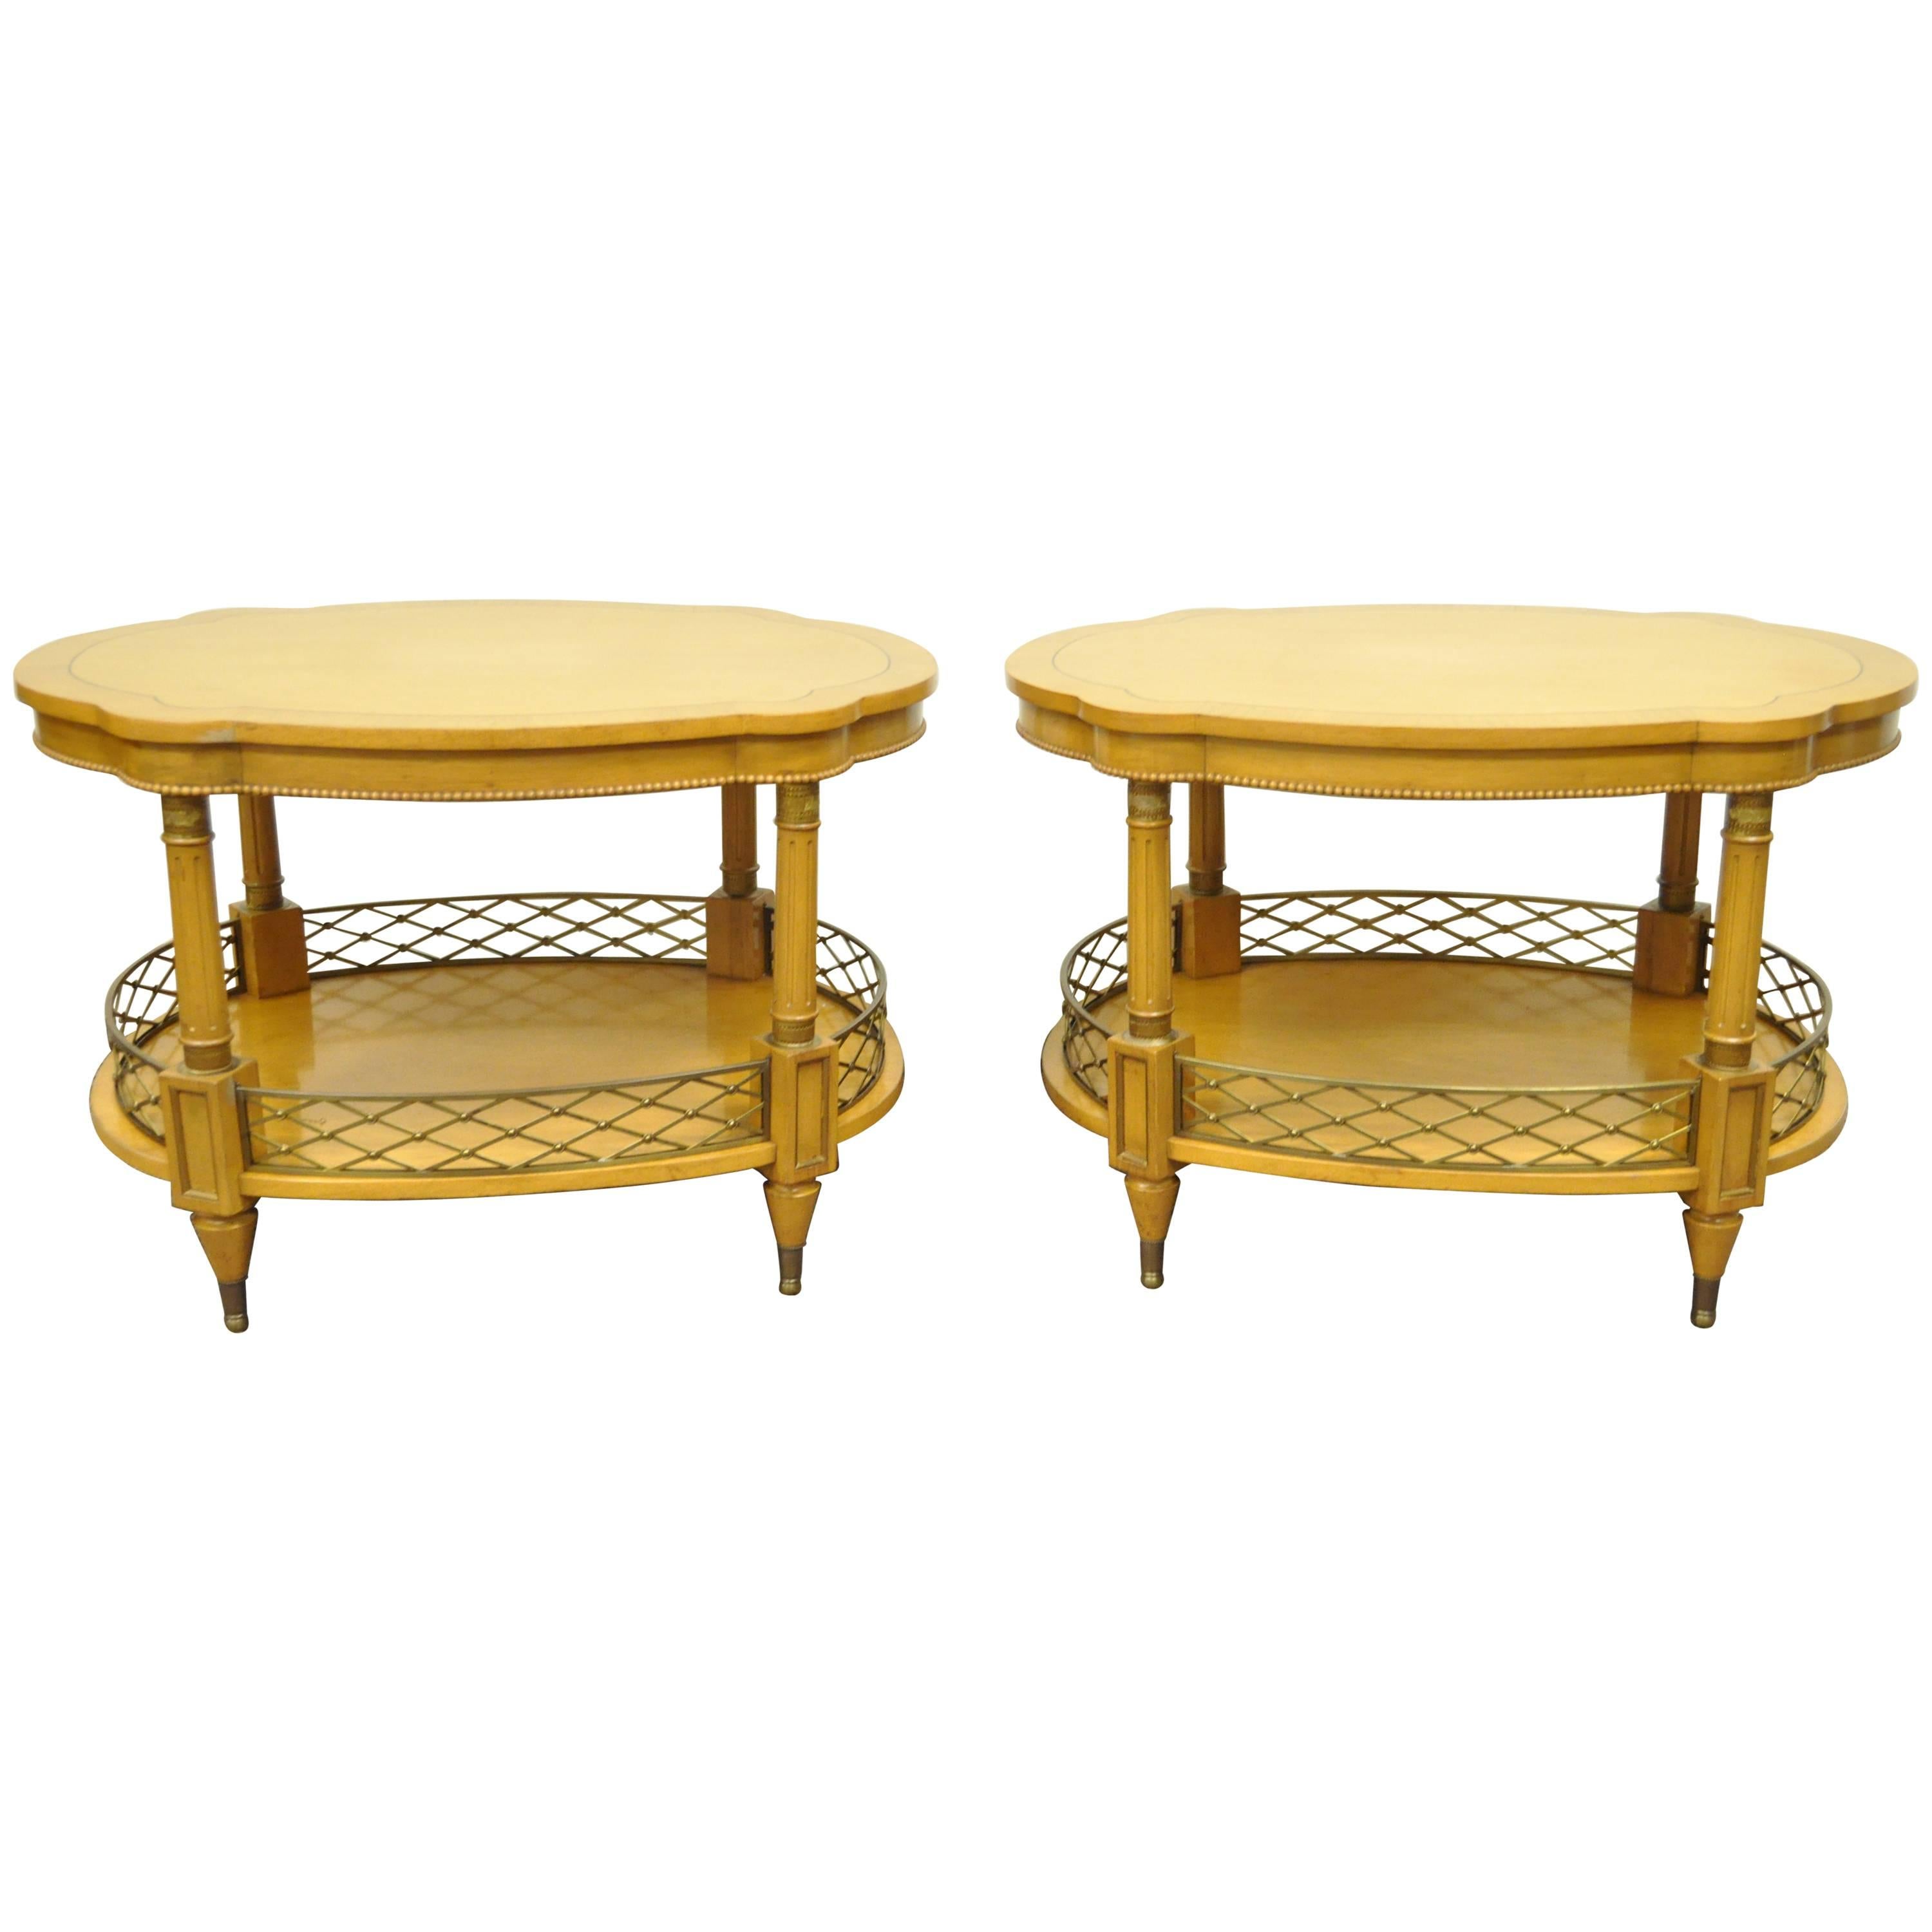 Pair of Custom French Regency Style Oversize Turtle Top Two Tier Lamp End Tables